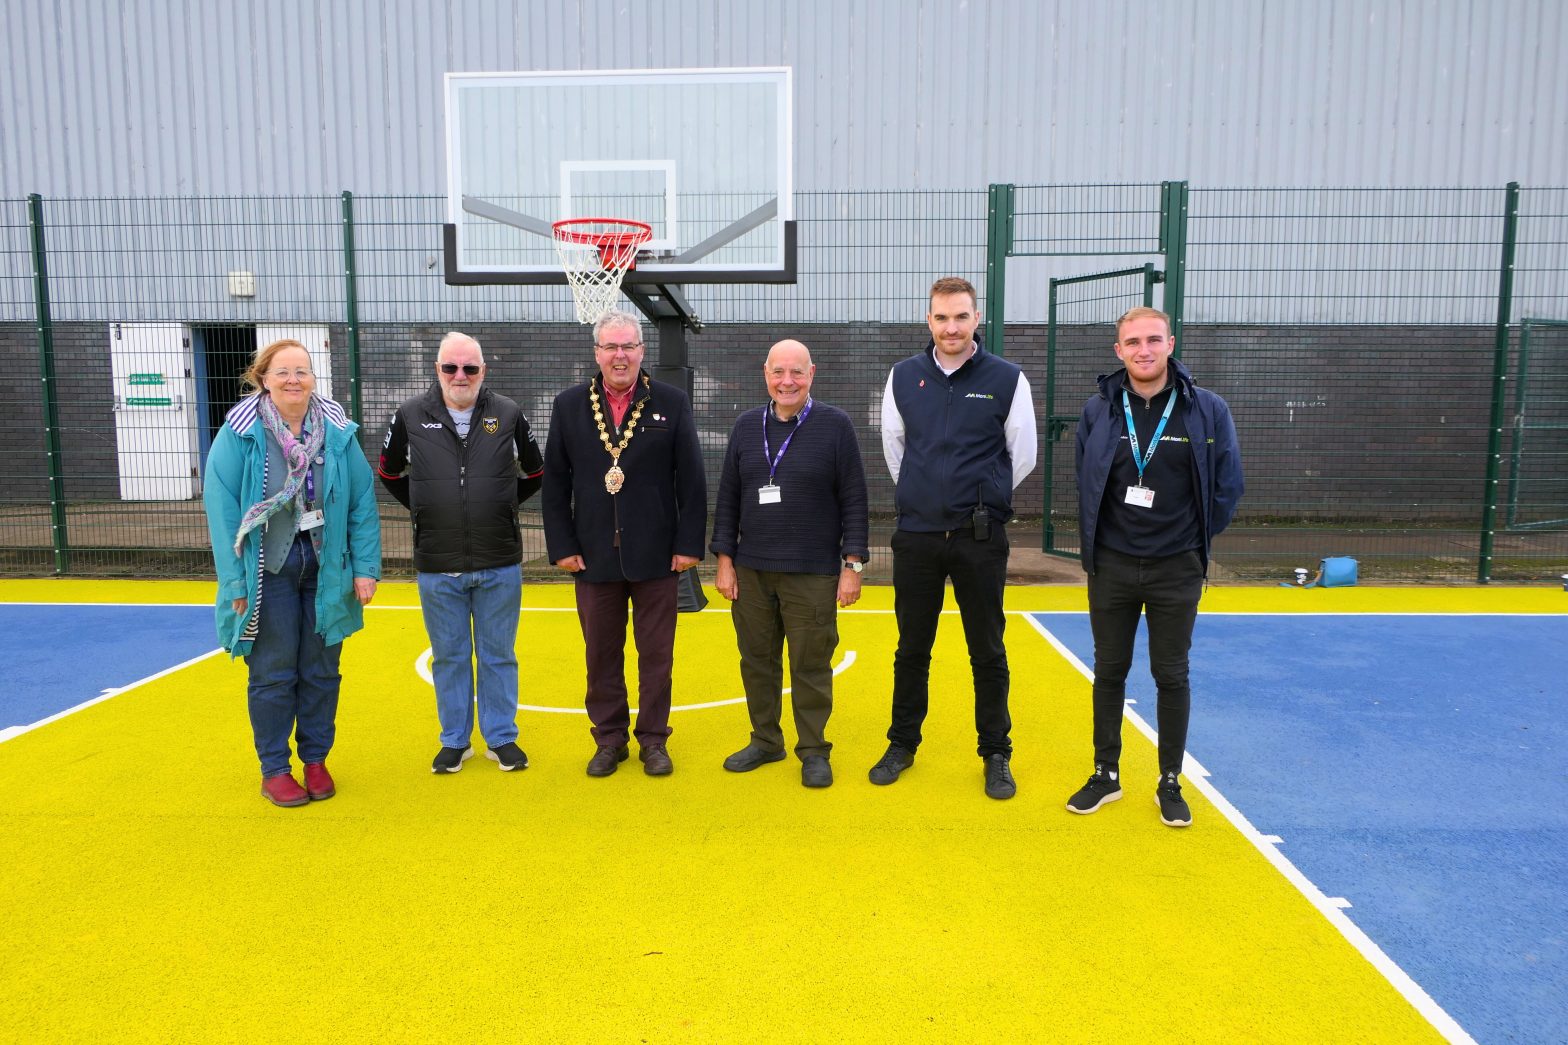 Photo on the new MUGA at Caldicot Leisure centre.  Cllr Jackie Strong, Cllr I R Shillabeer (Caldicot Town Council) , Cllr Meirion Howells (Chair), Cllr Martyn Groucutt, Joe Killingley, Jack Harris (Community and Sport Development Officer)